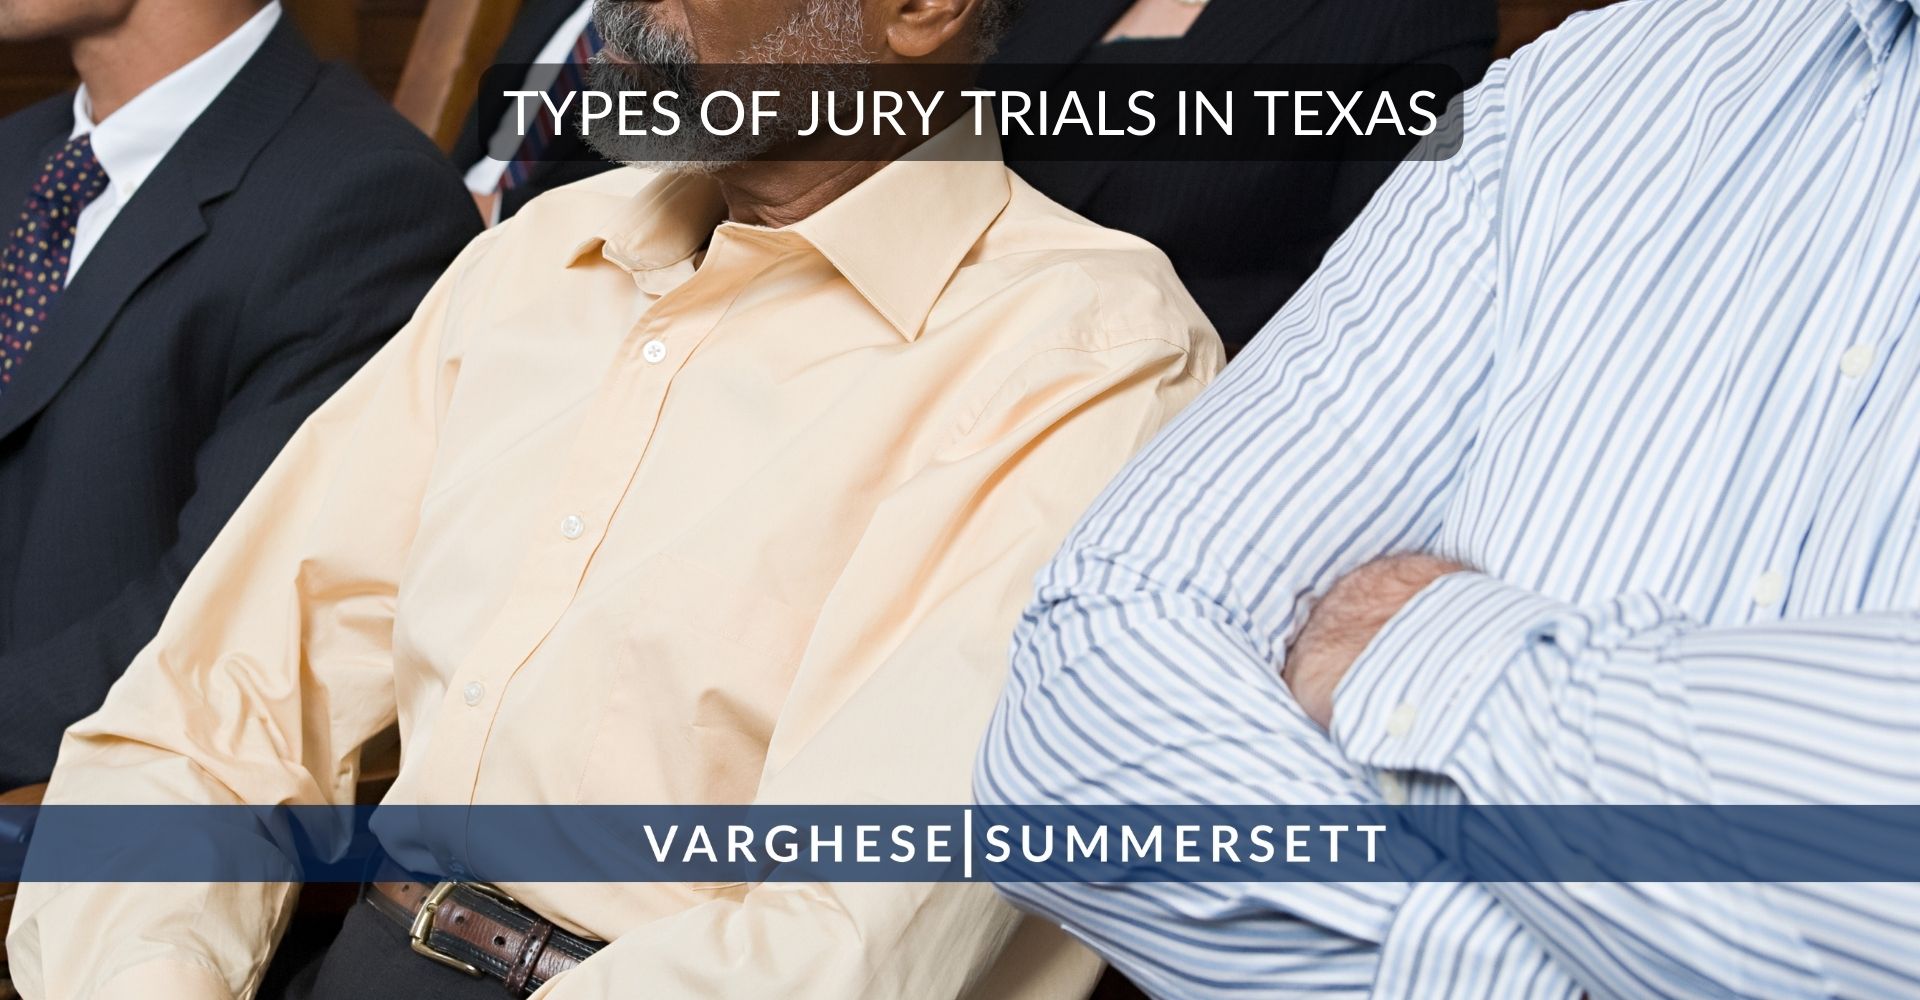 Types of Jury Trials in Texas